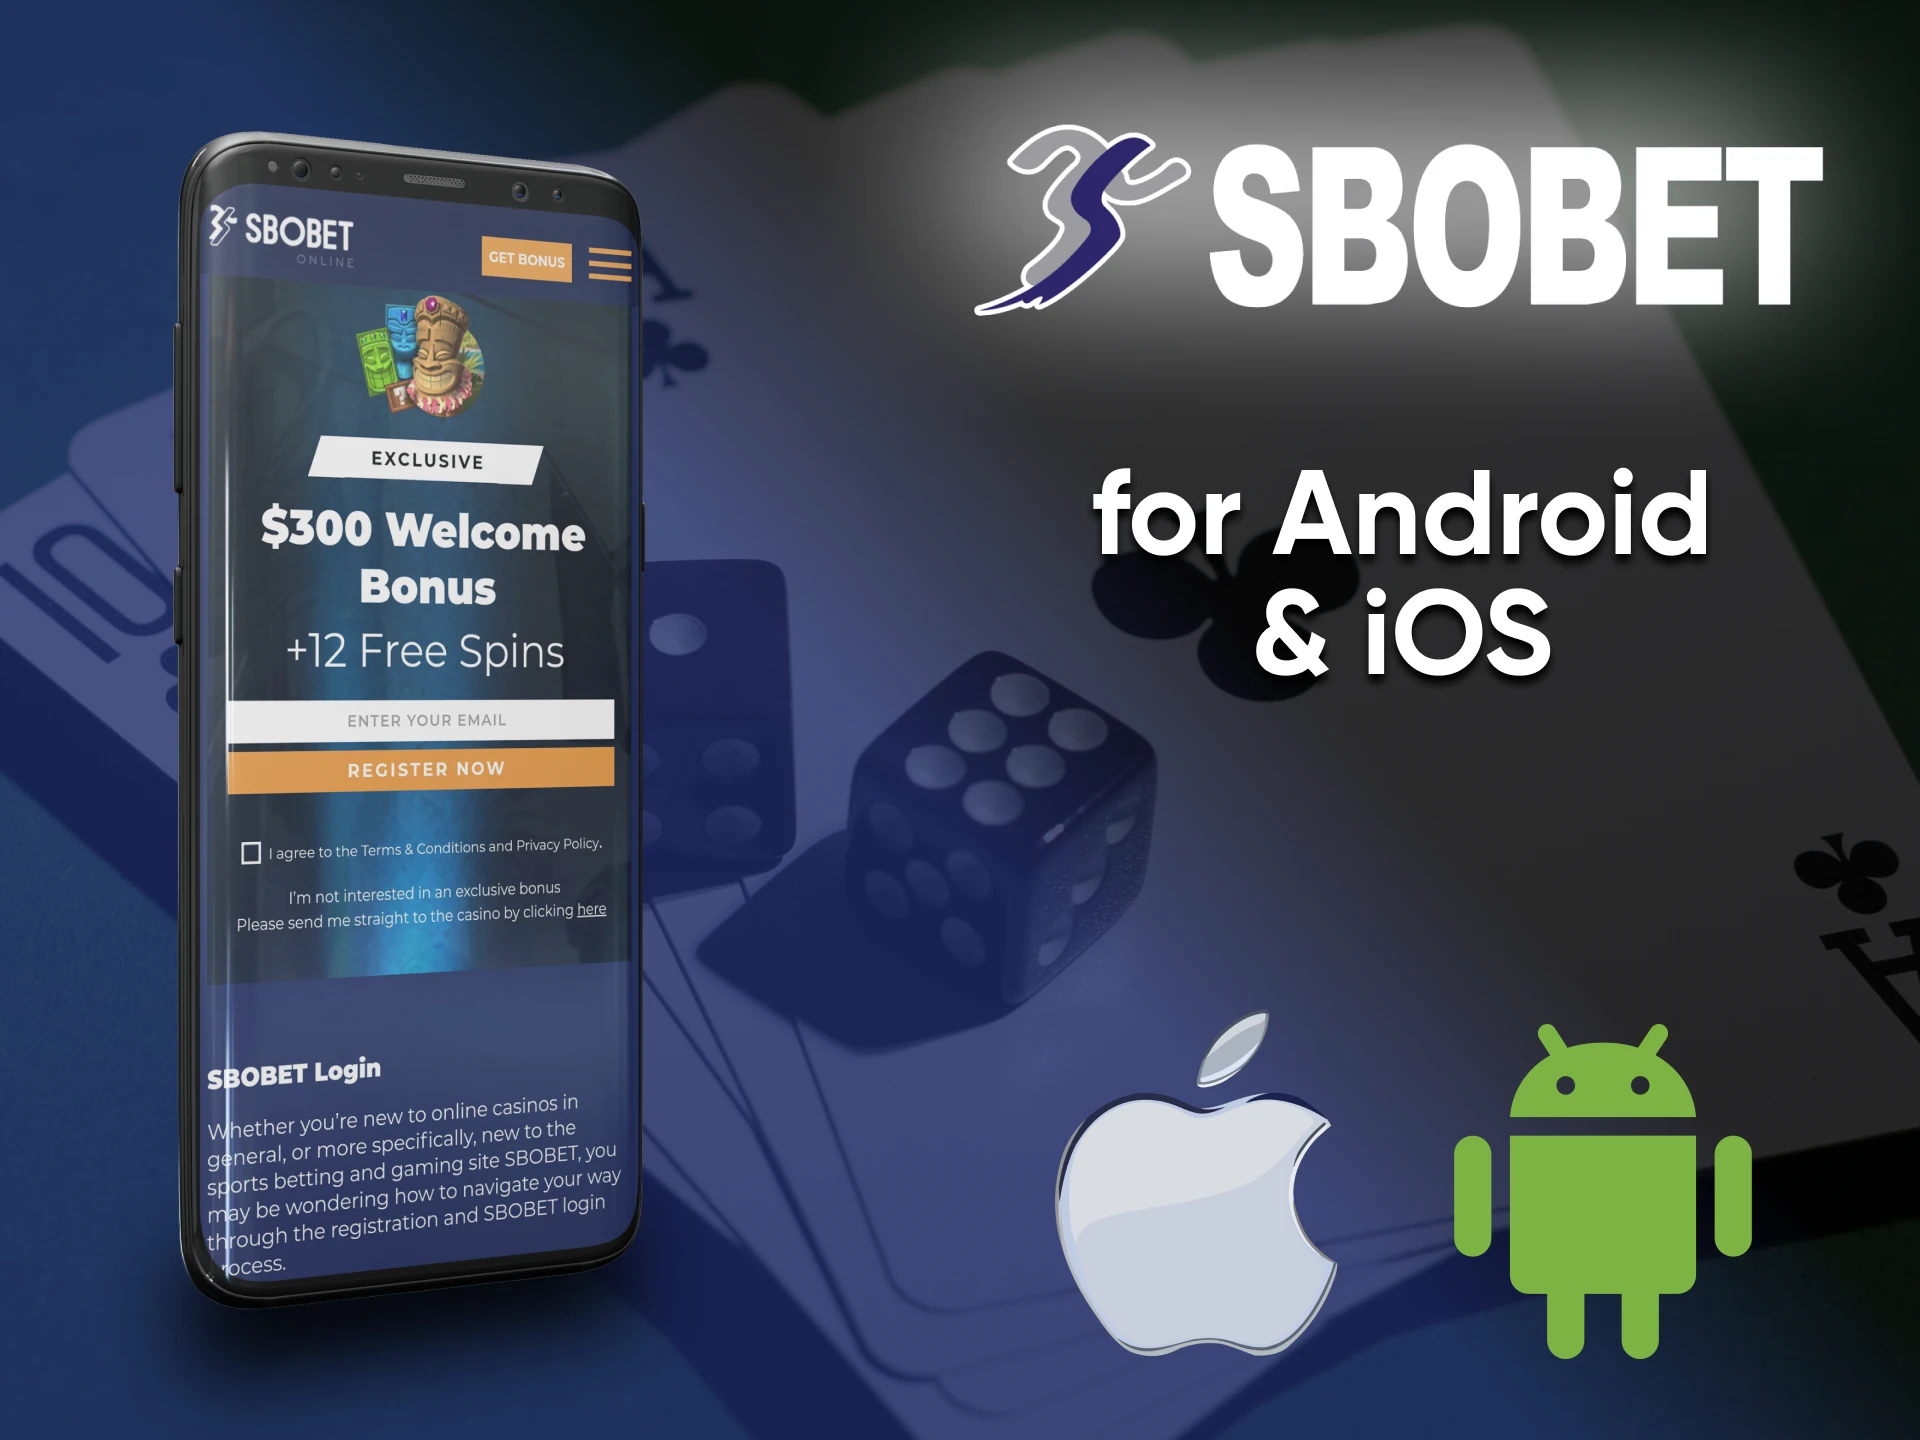 Use the mobile version of Sbobet for casino games on your smartphone.